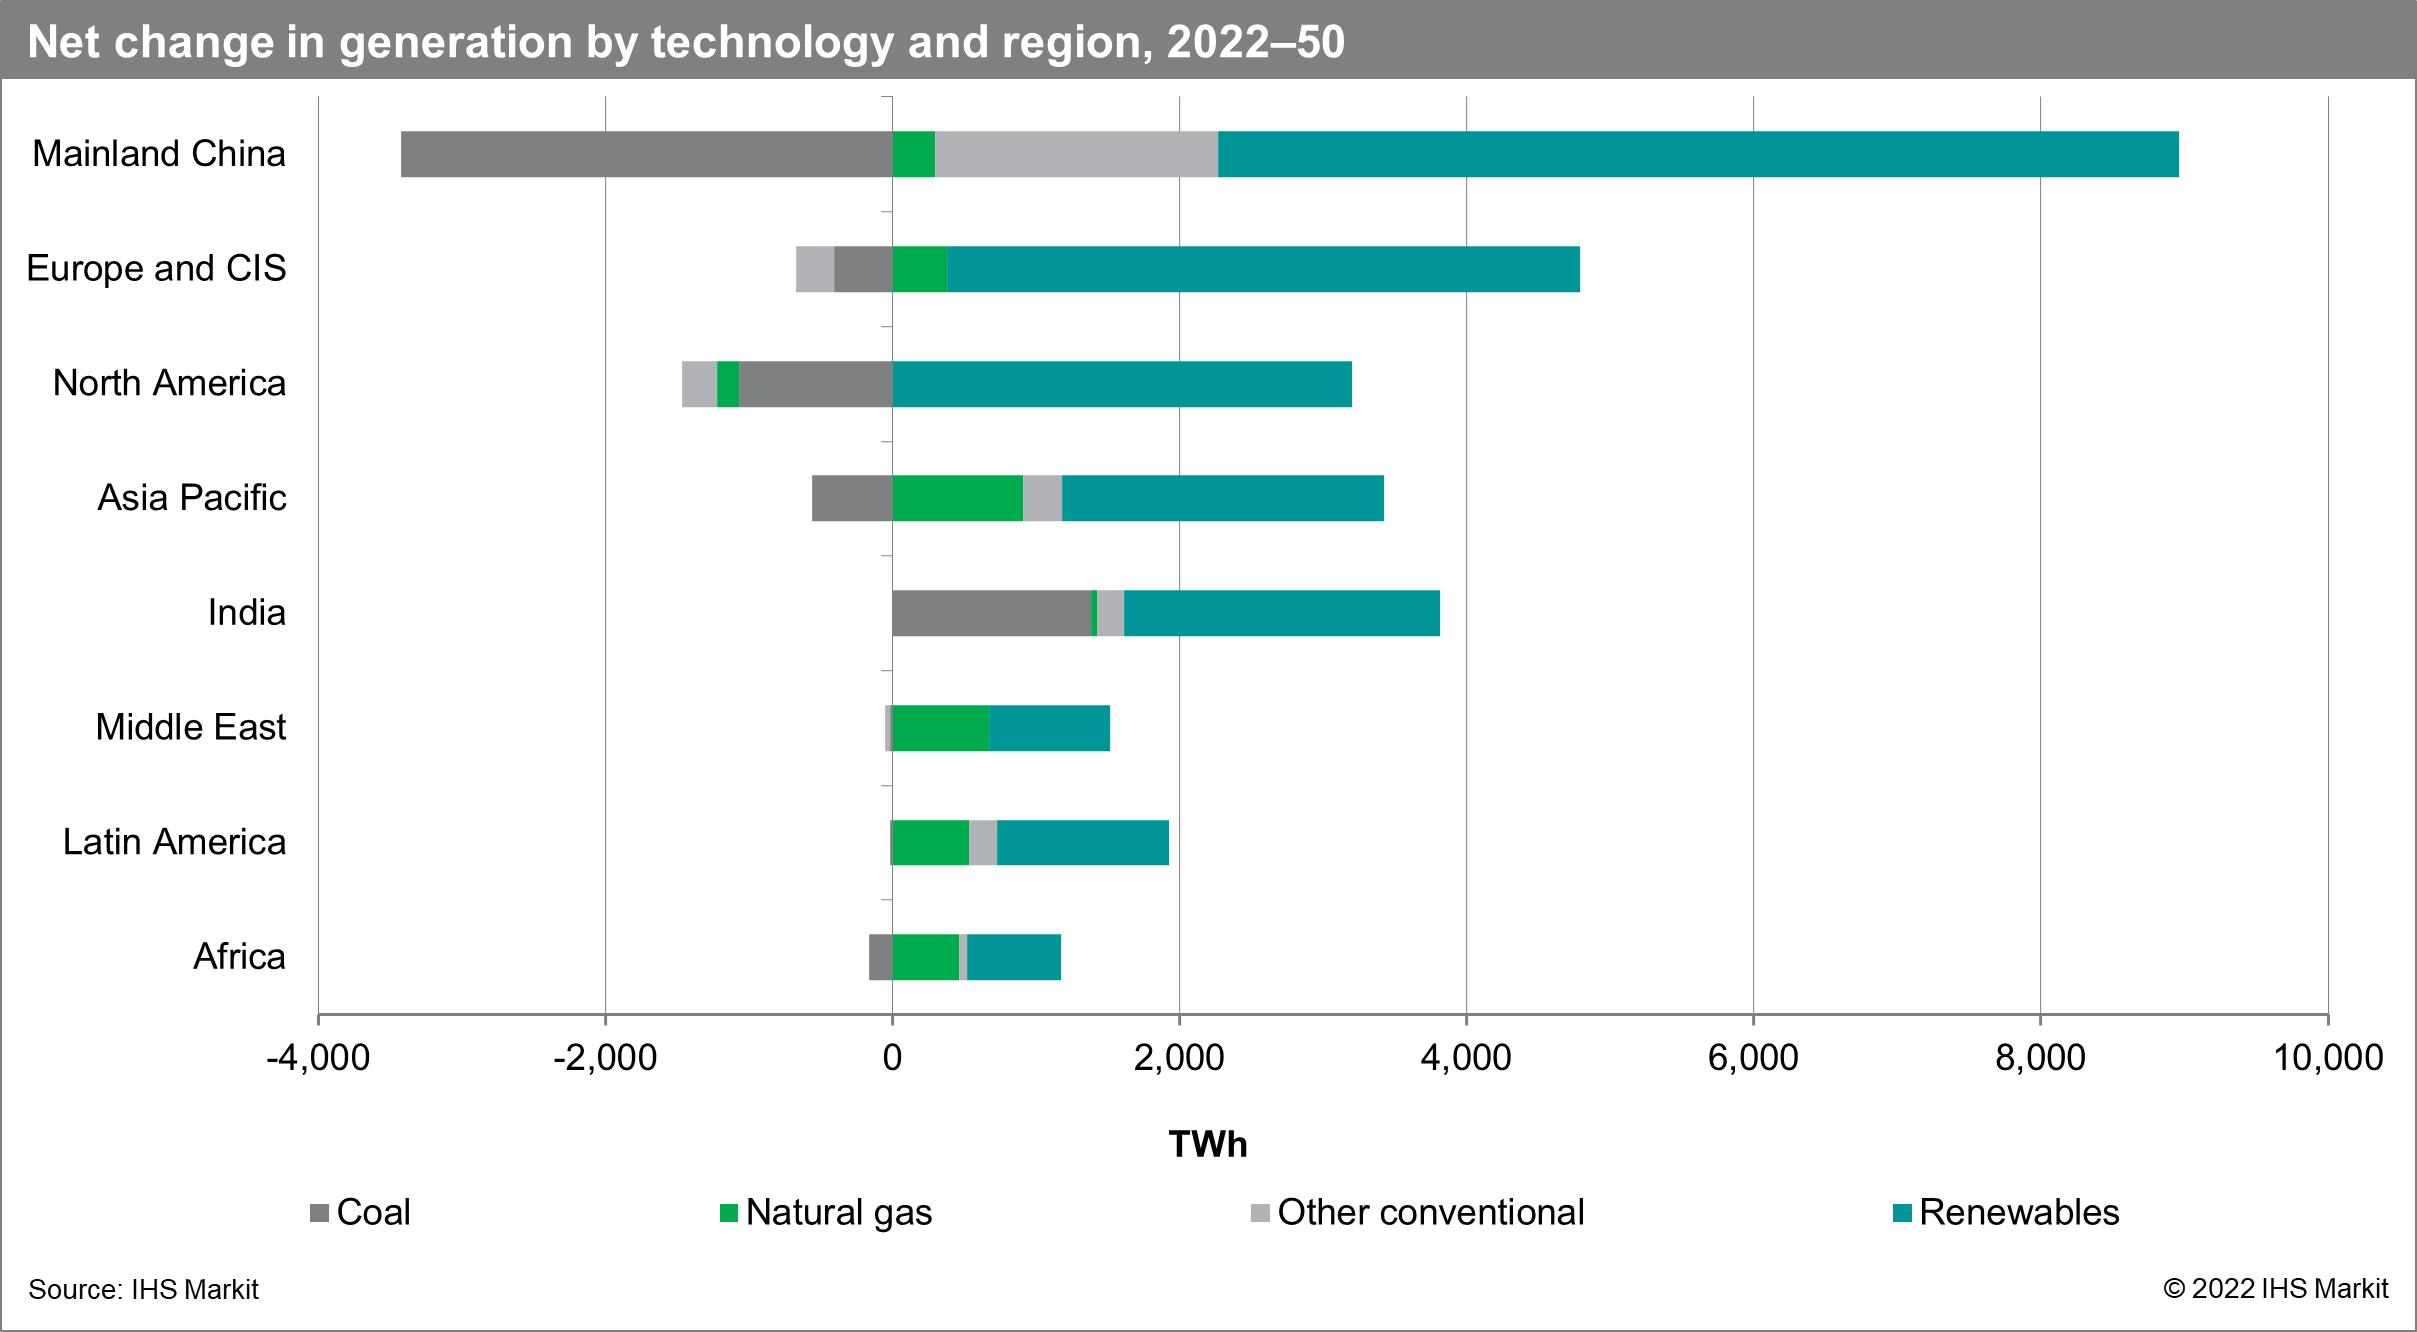 Net change in generation by technology and region, 2022-50